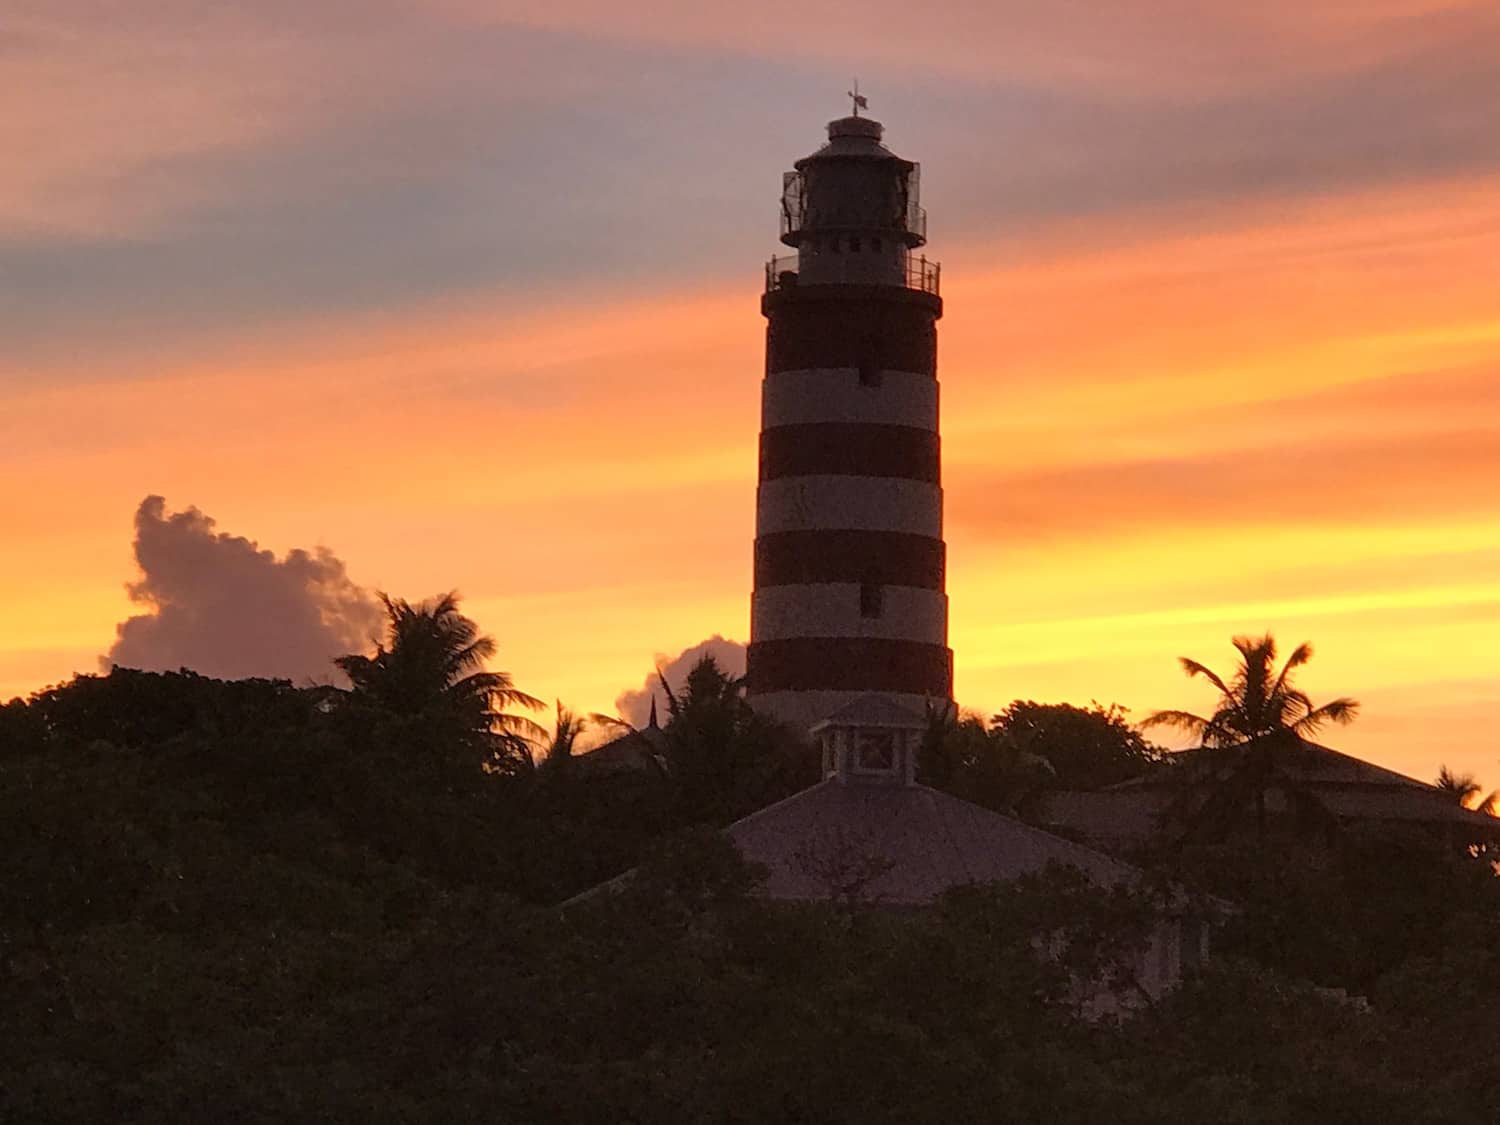 Hopetown lighthouse is a tourist attraction in the abacos of the bahamas